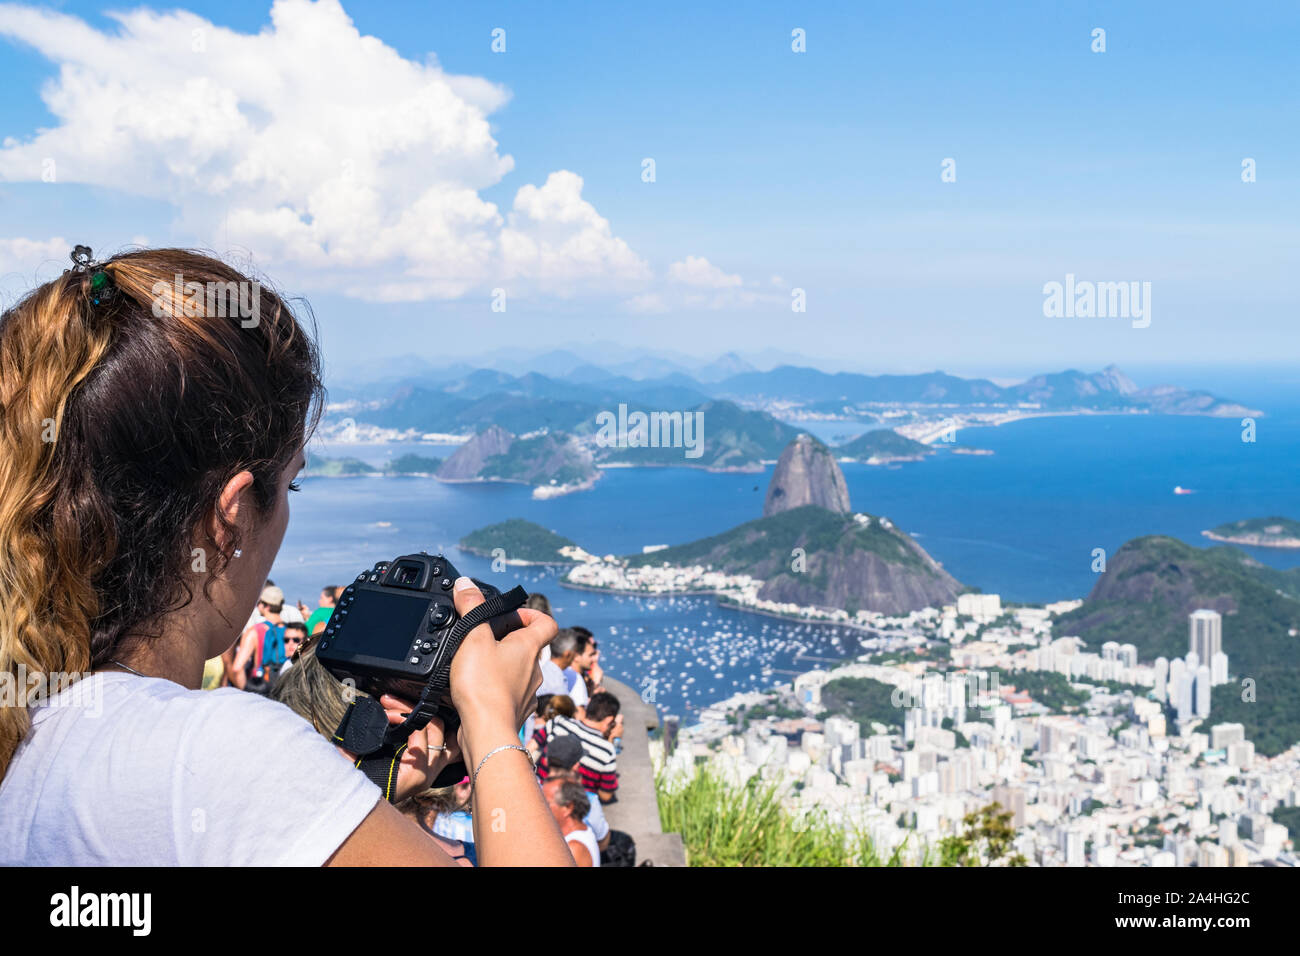 A woman with a camera taking picture of the landscape from Corcovado Mountain in Brazil Stock Photo